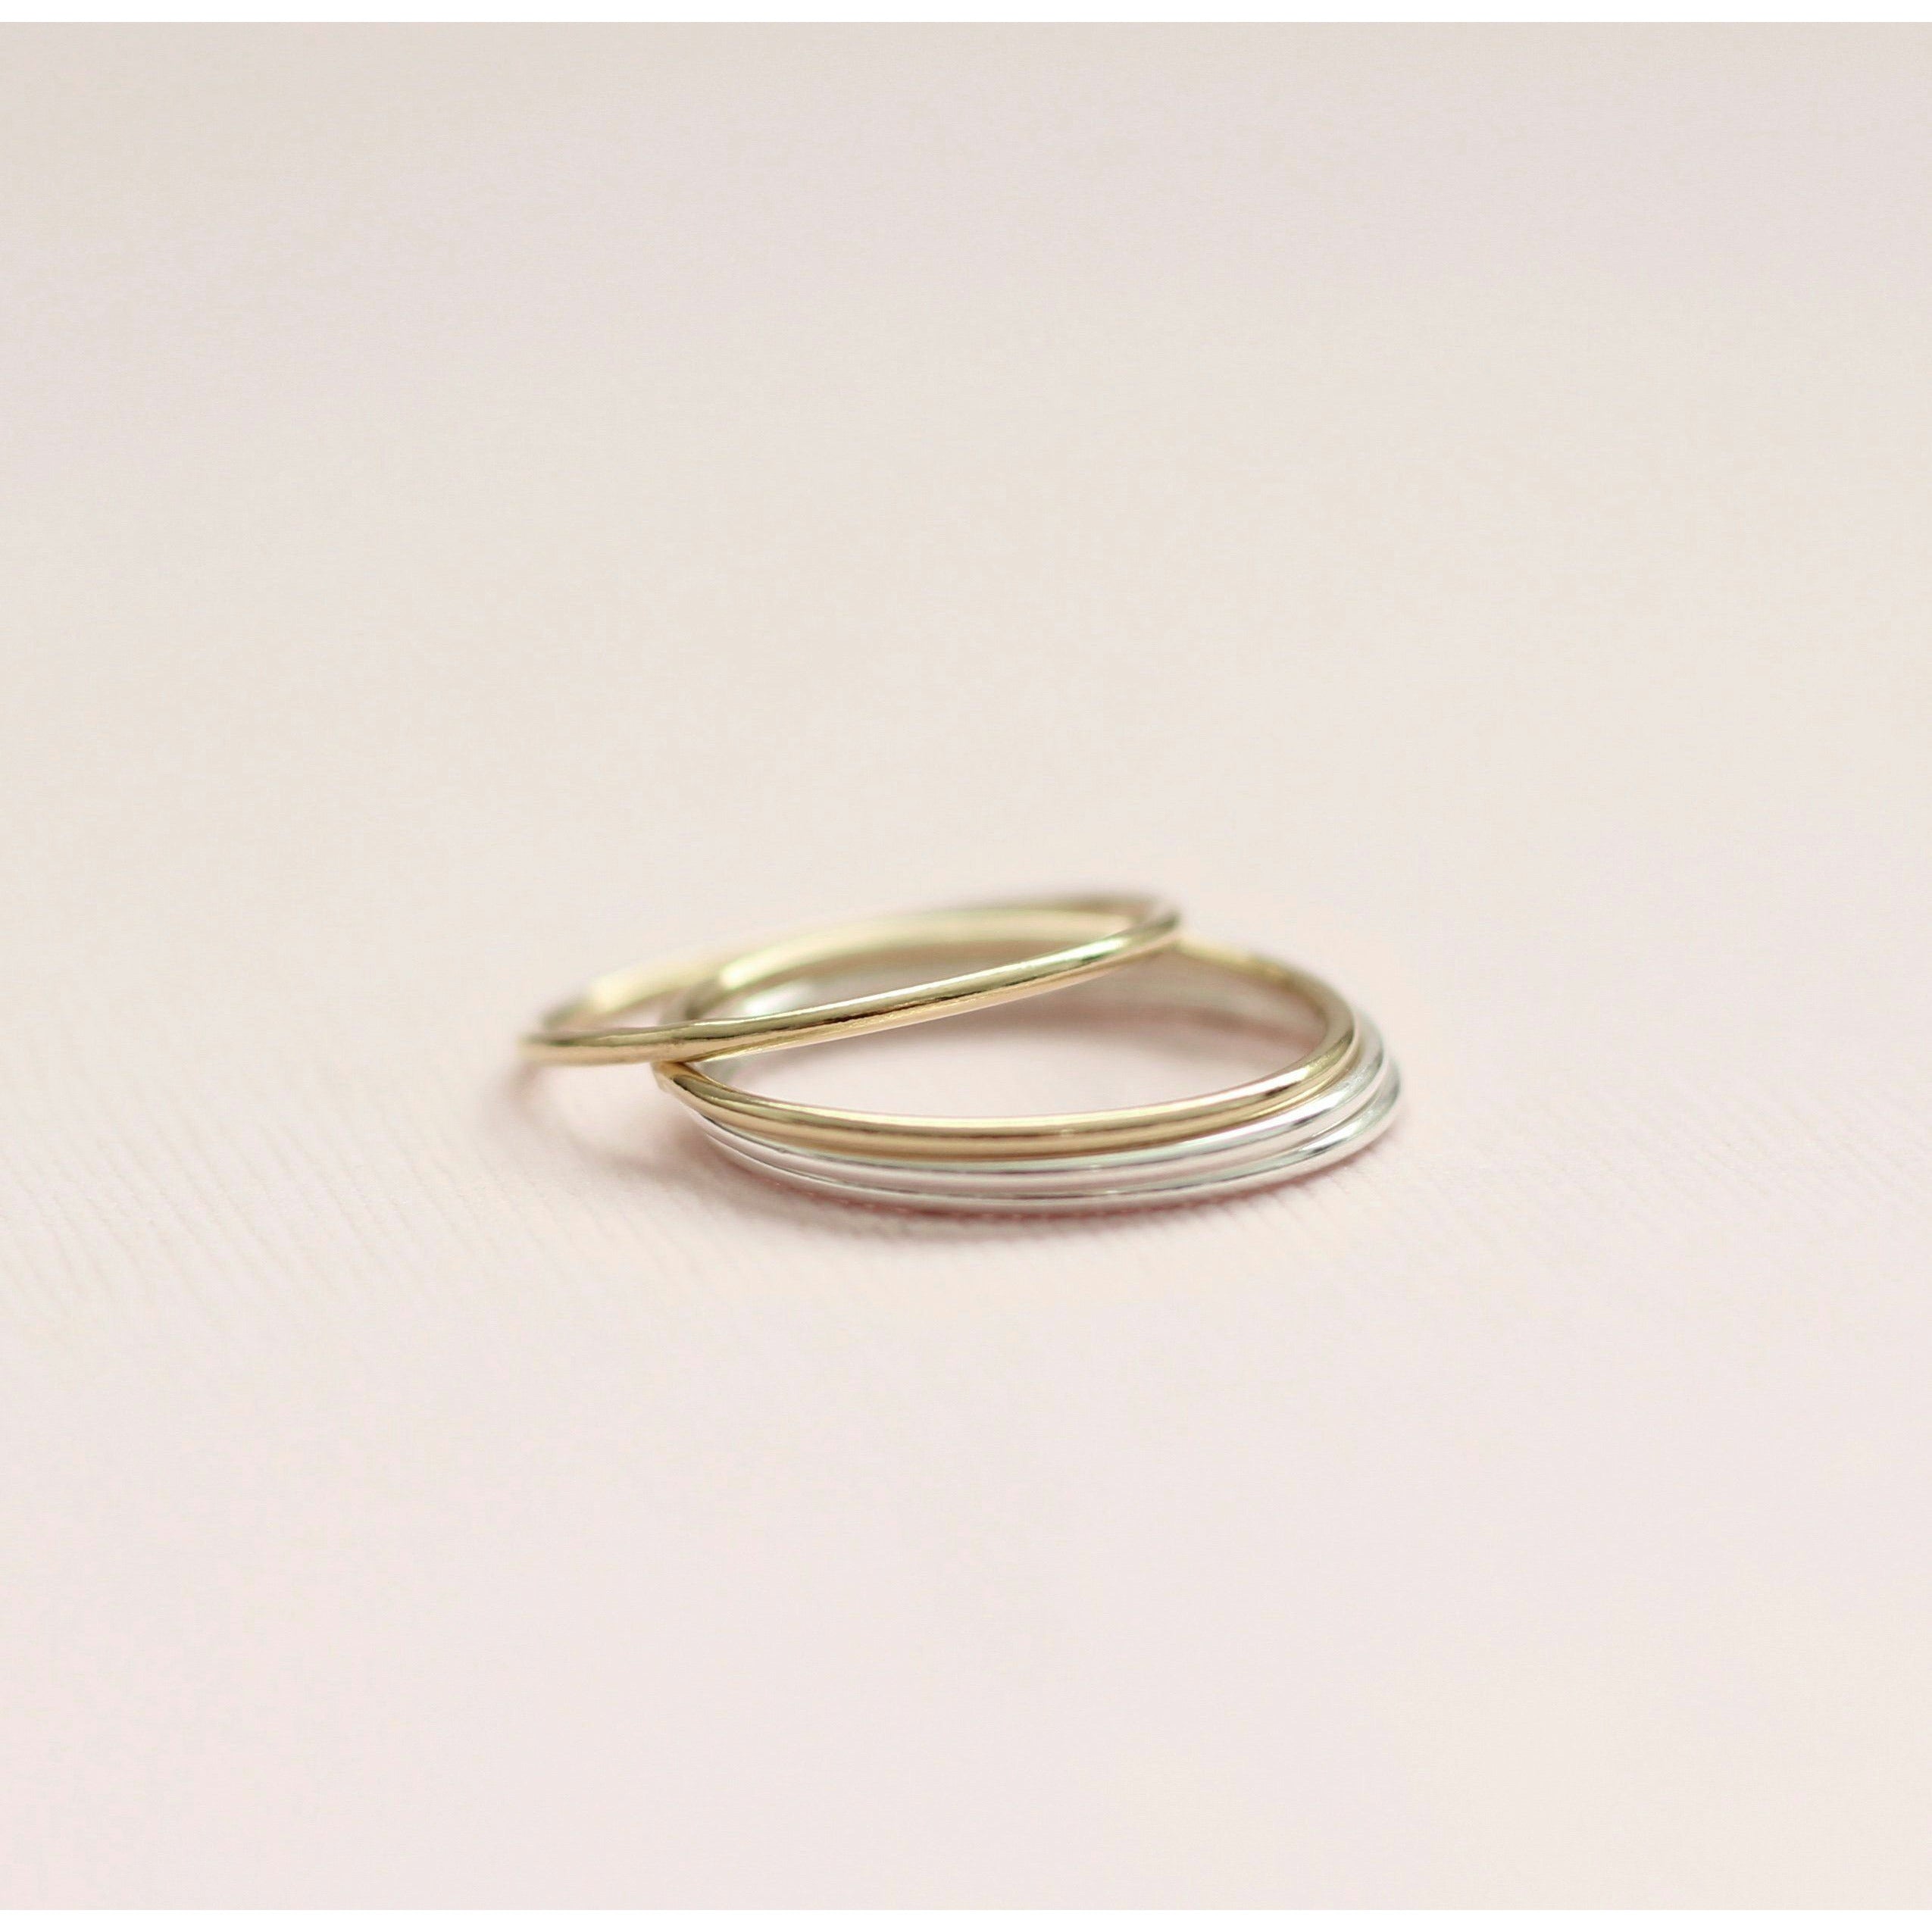 Gold and sterling silver plain stacking rings handmade in Canada